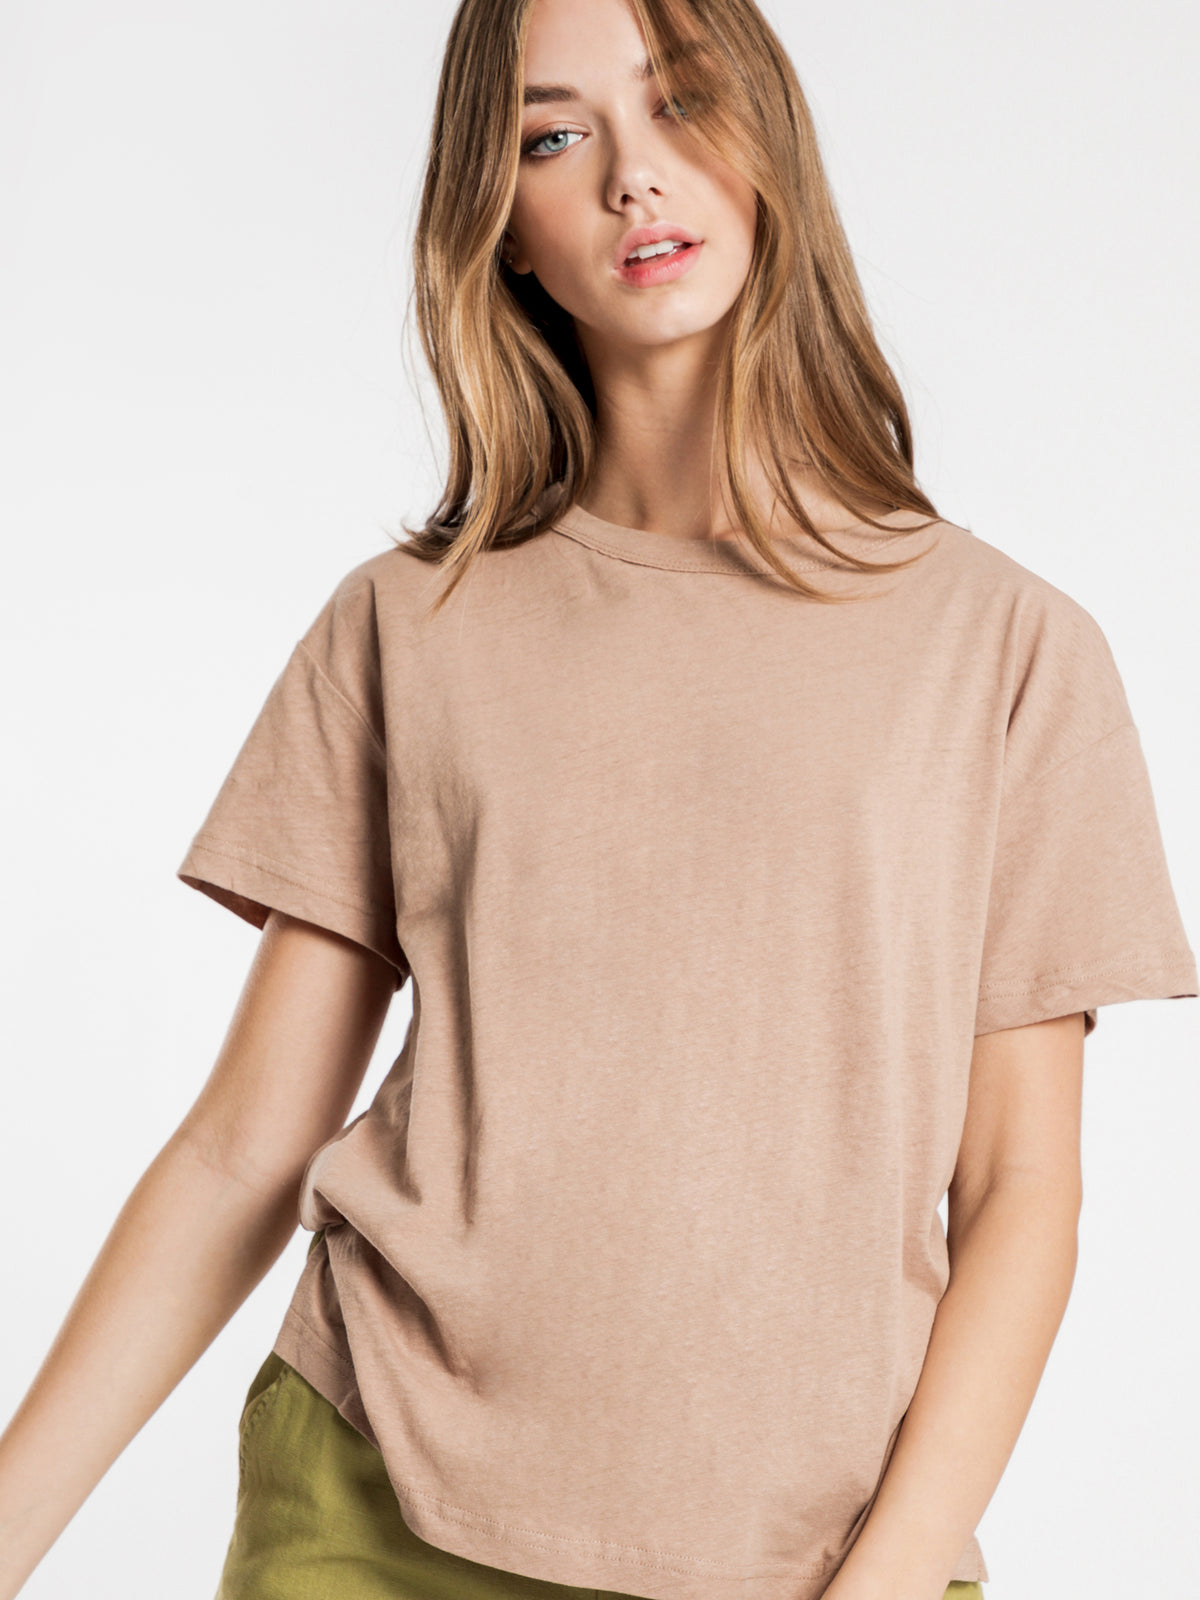 Atwood Slouchy T-Shirt in Mocha - Glue Store